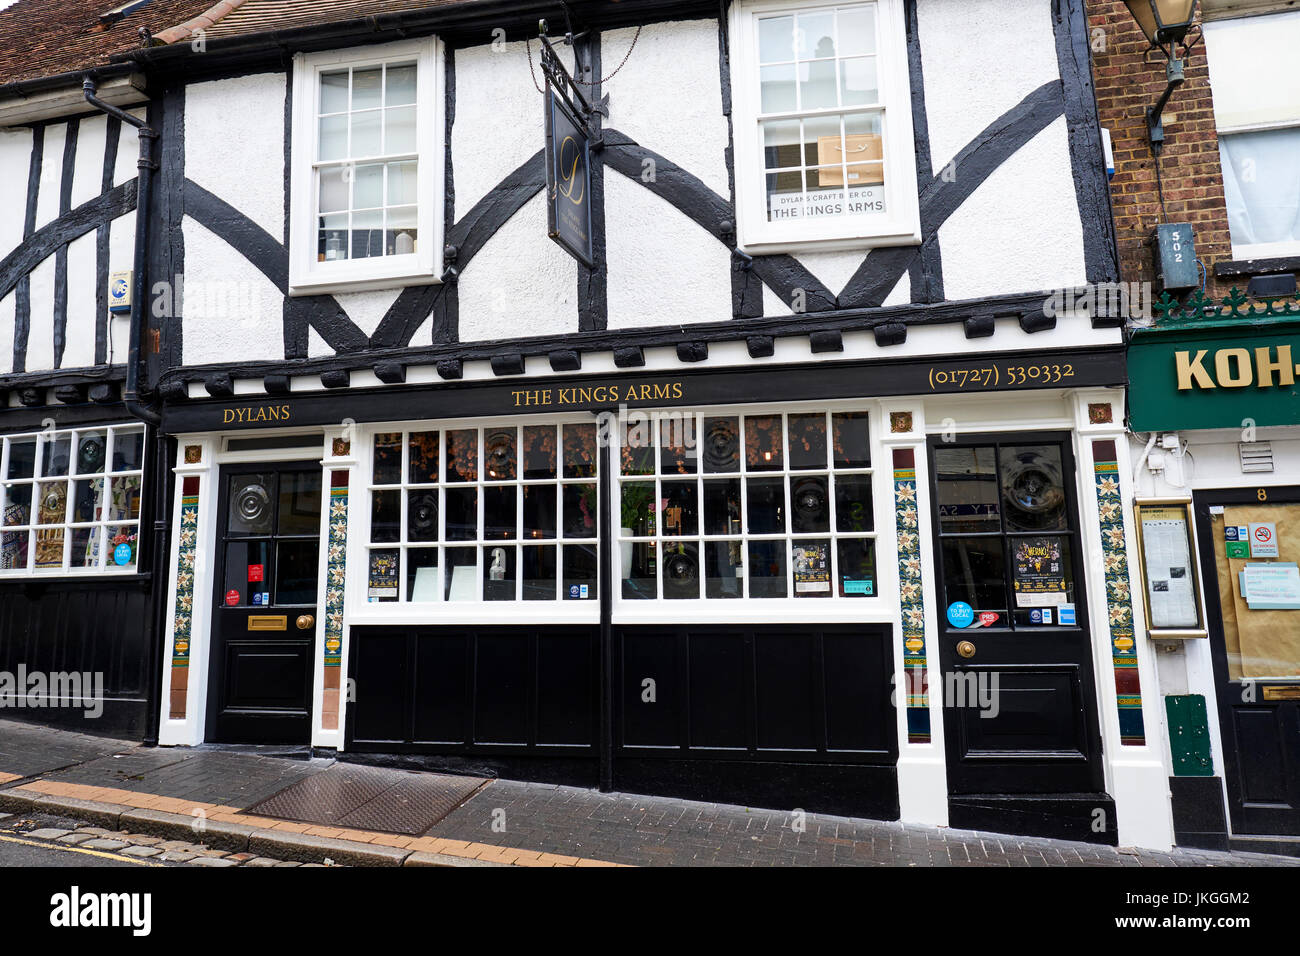 The Dylans Kings Arms Public House, George Street, St Albans, Hertfordshire, UK Stock Photo